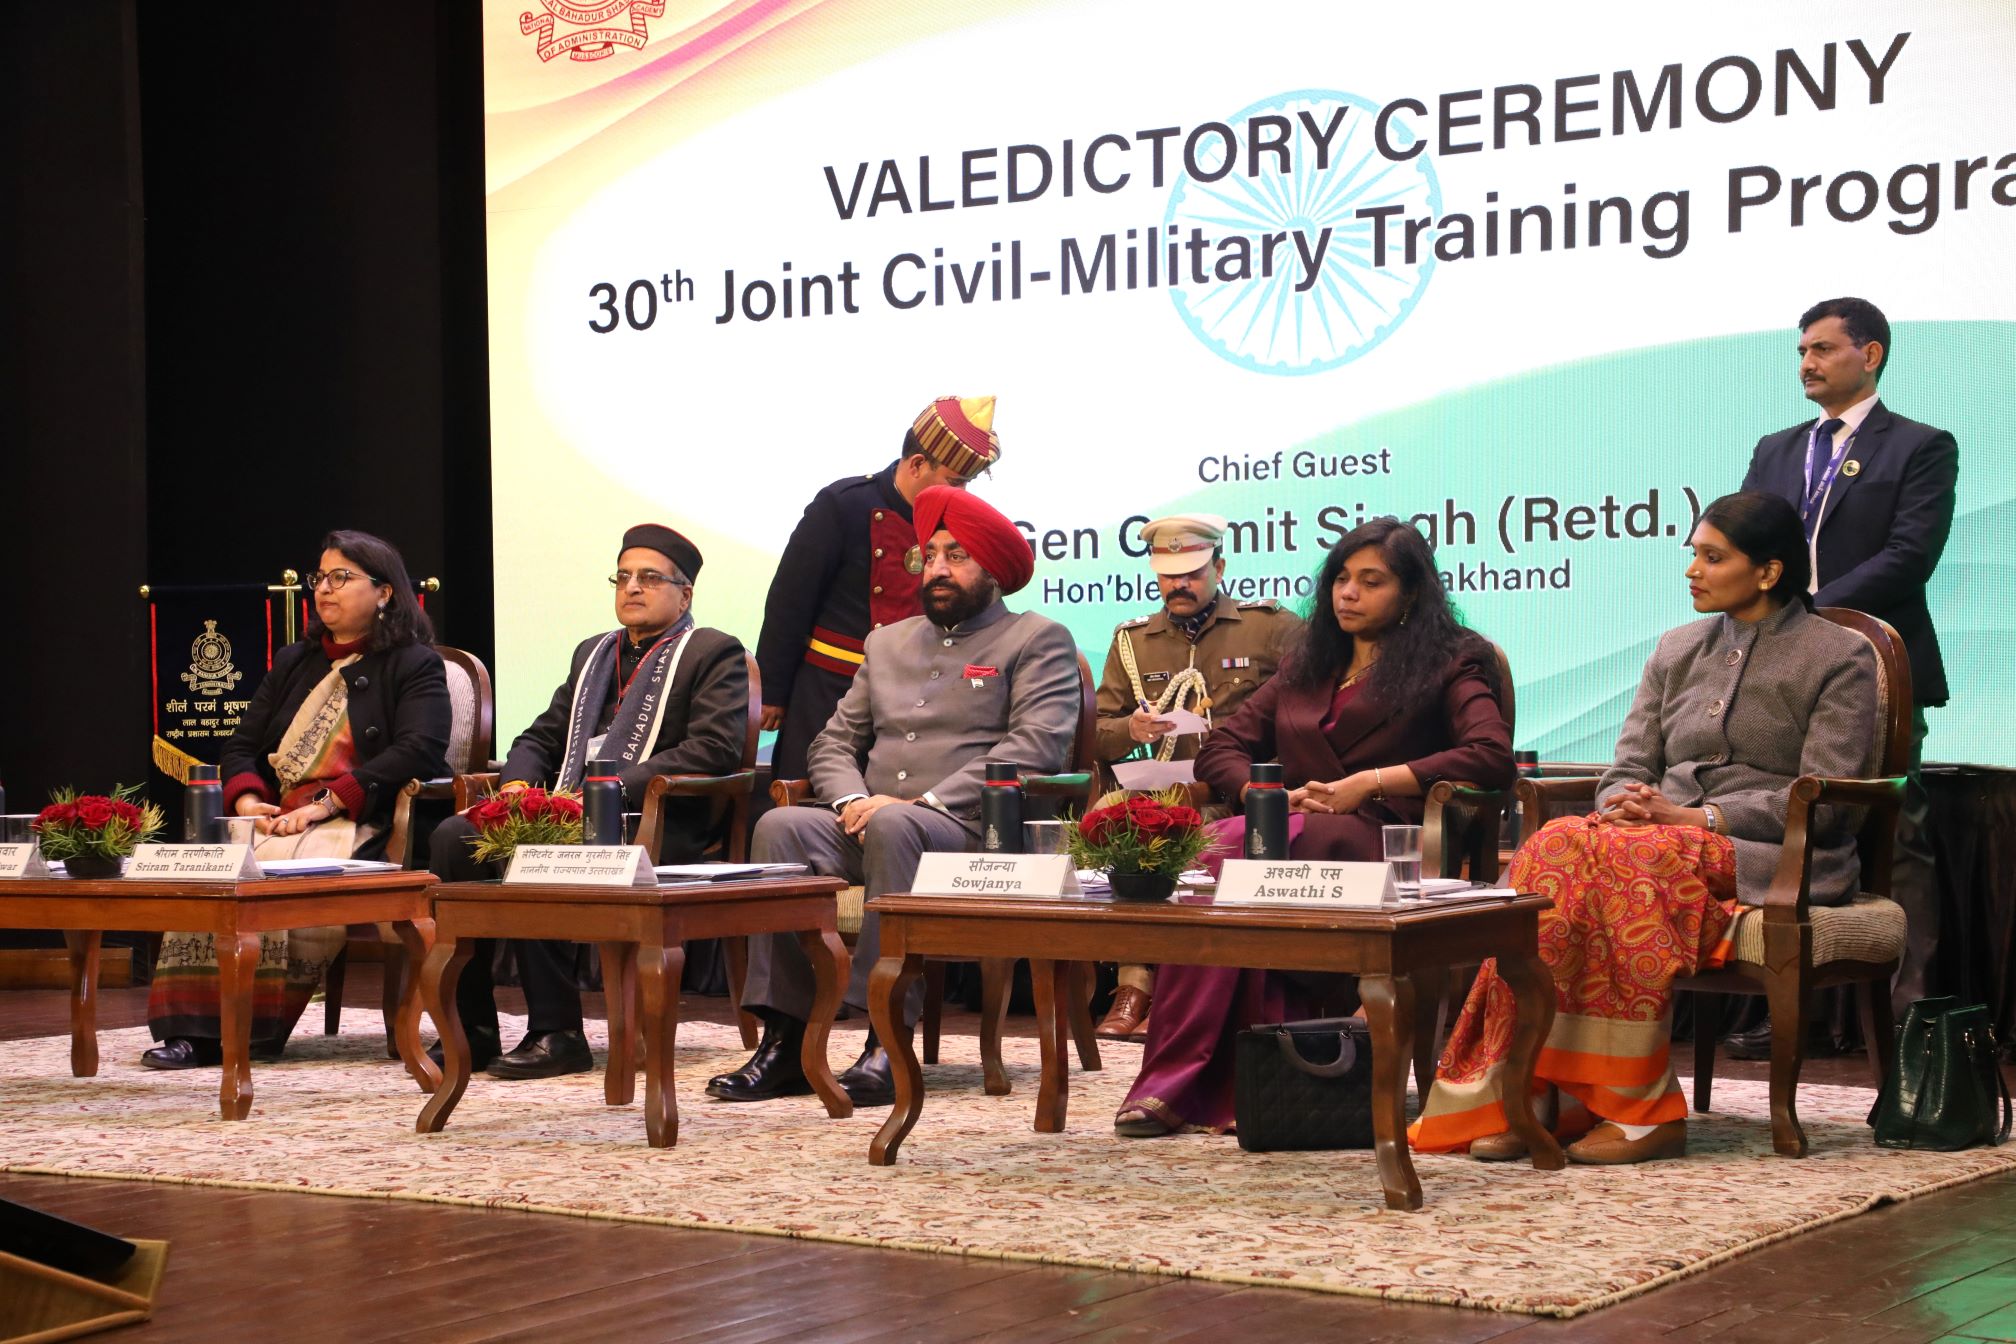 Valedictory Programme of 30th Joint Civil-Military Training Programme on National Security